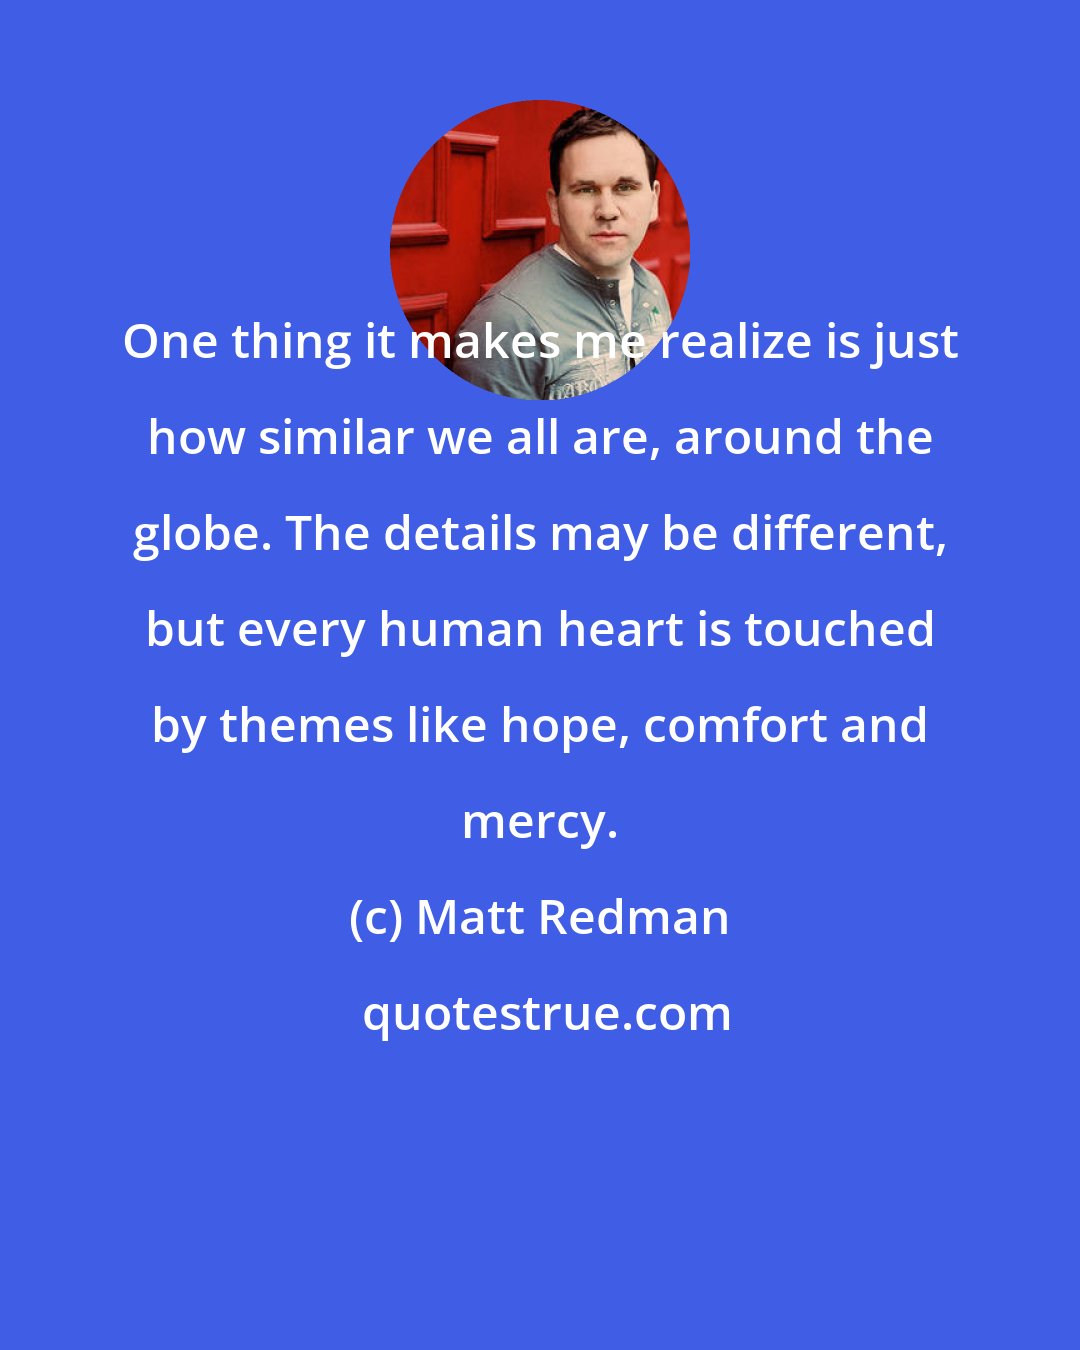 Matt Redman: One thing it makes me realize is just how similar we all are, around the globe. The details may be different, but every human heart is touched by themes like hope, comfort and mercy.